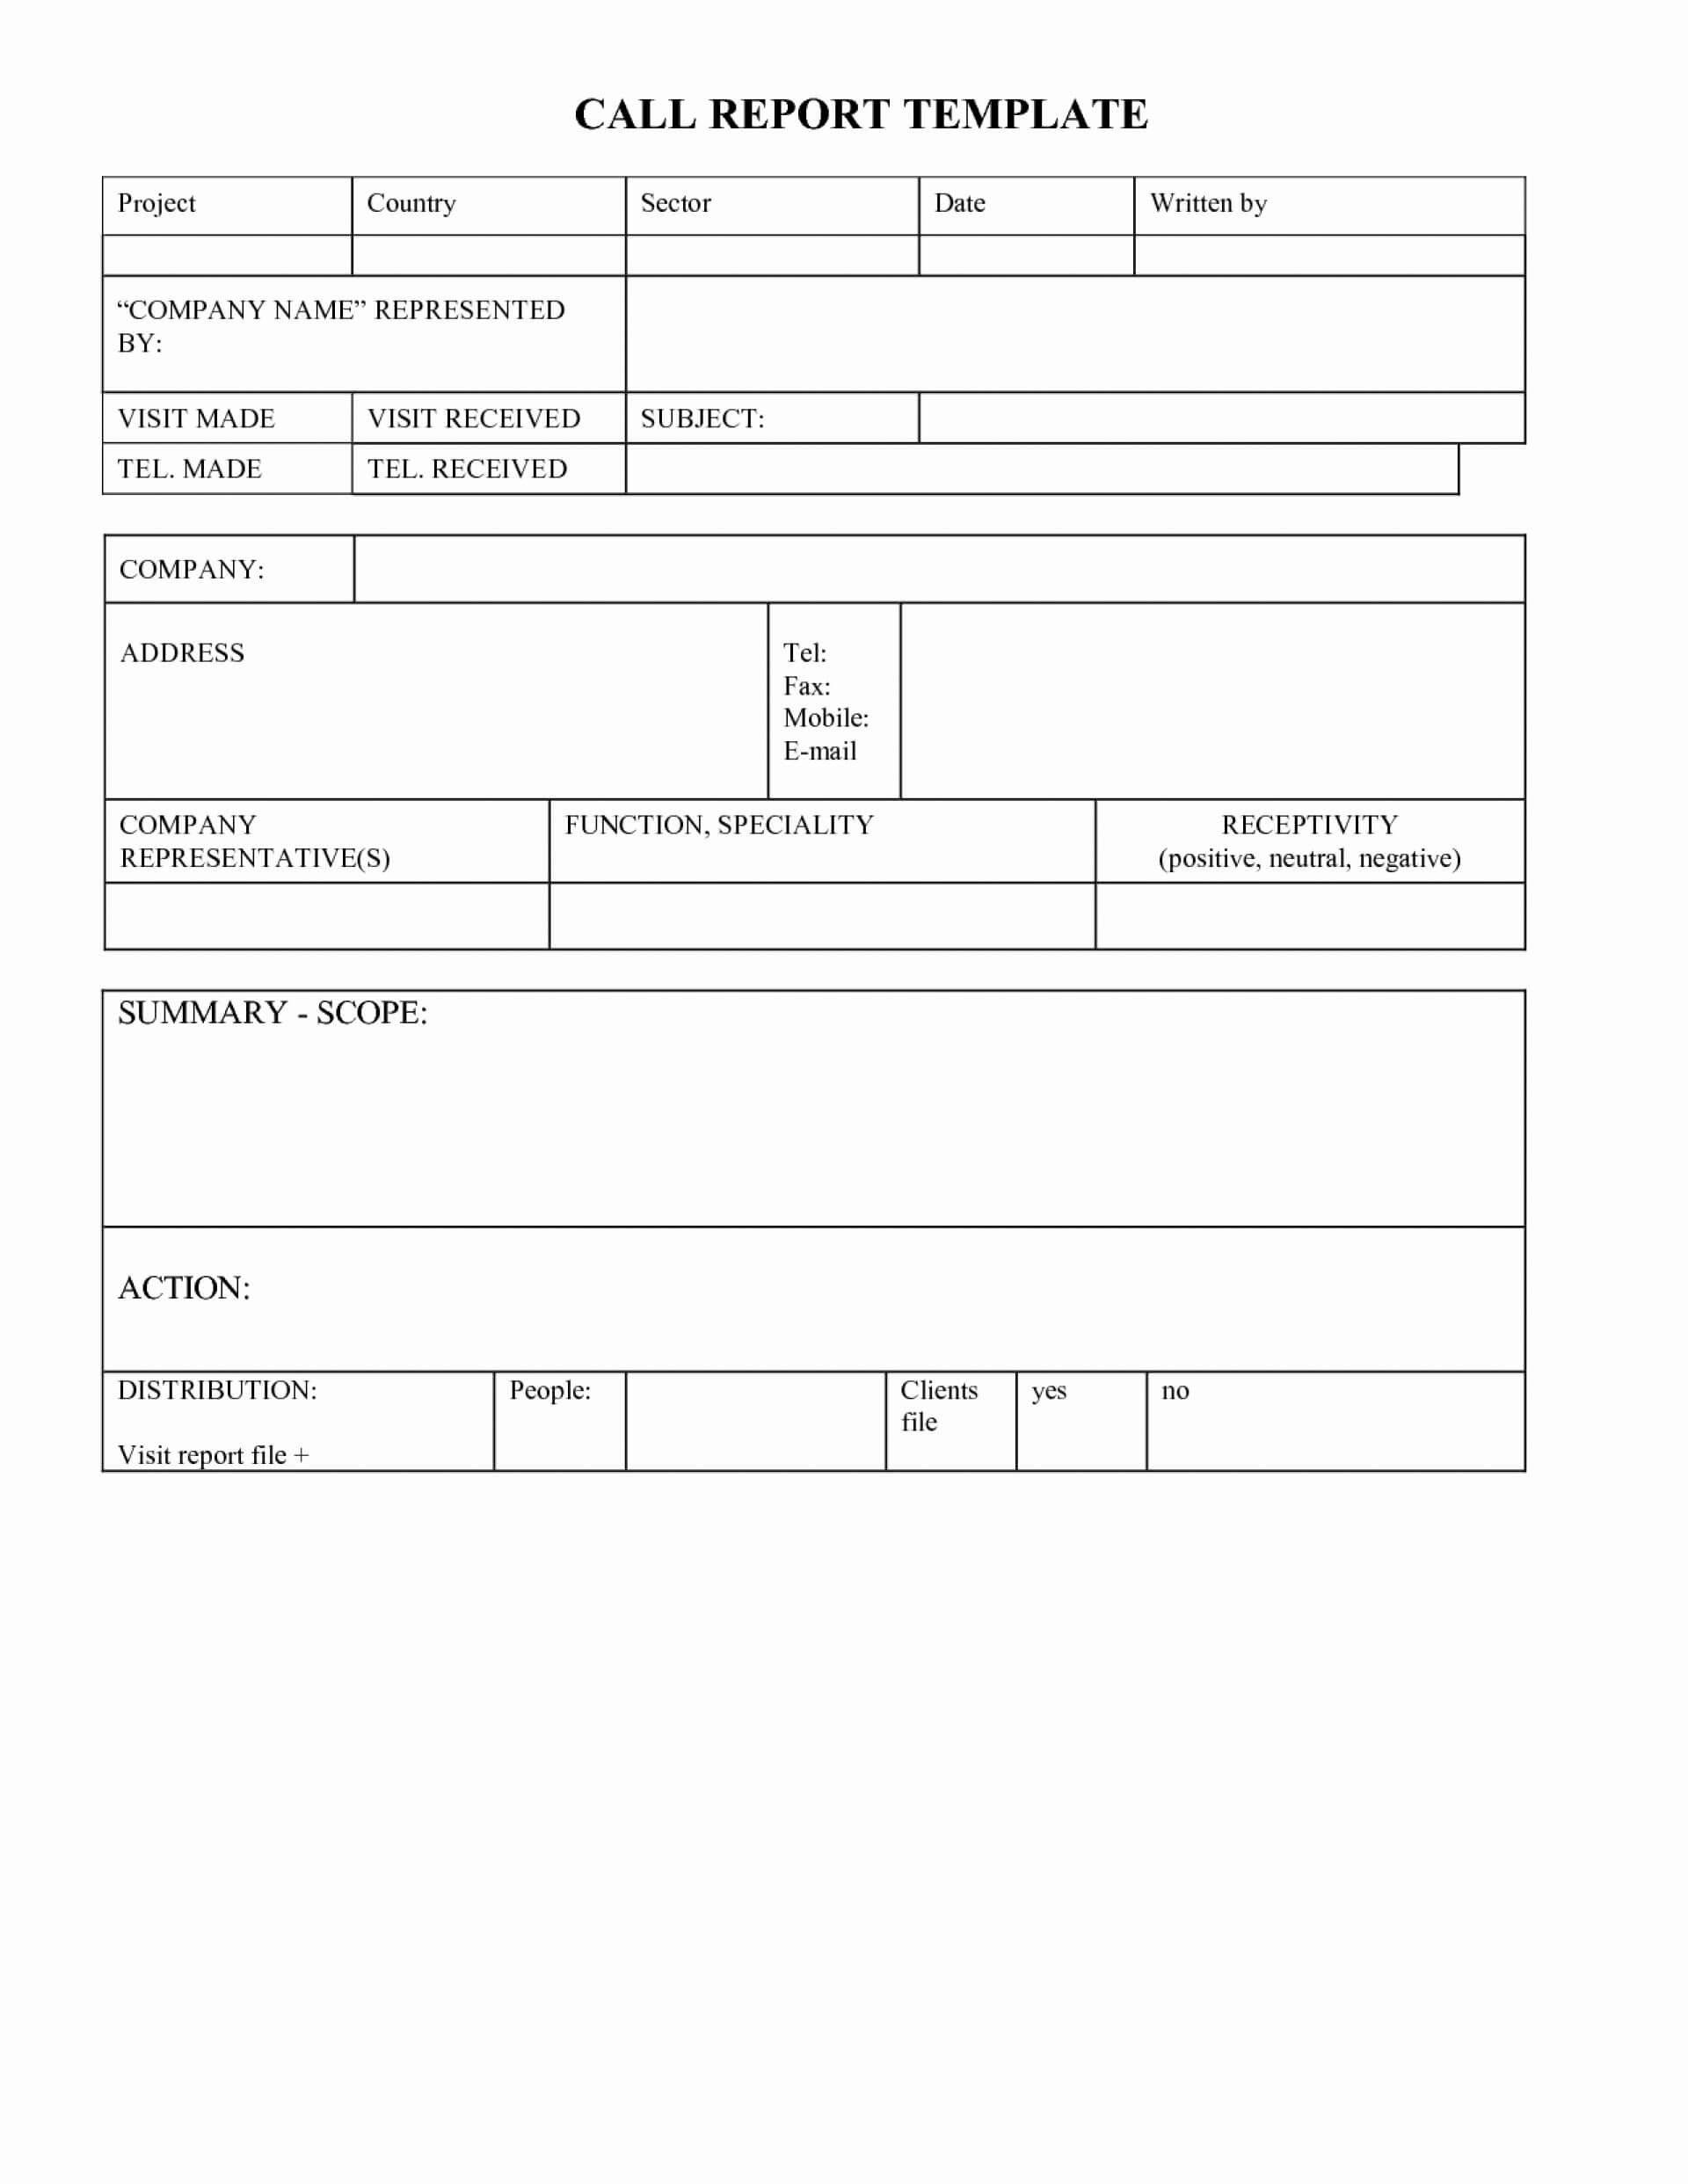 008 Sample Sales Call Reports Picture Of Report Template For Sales Rep Visit Report Template